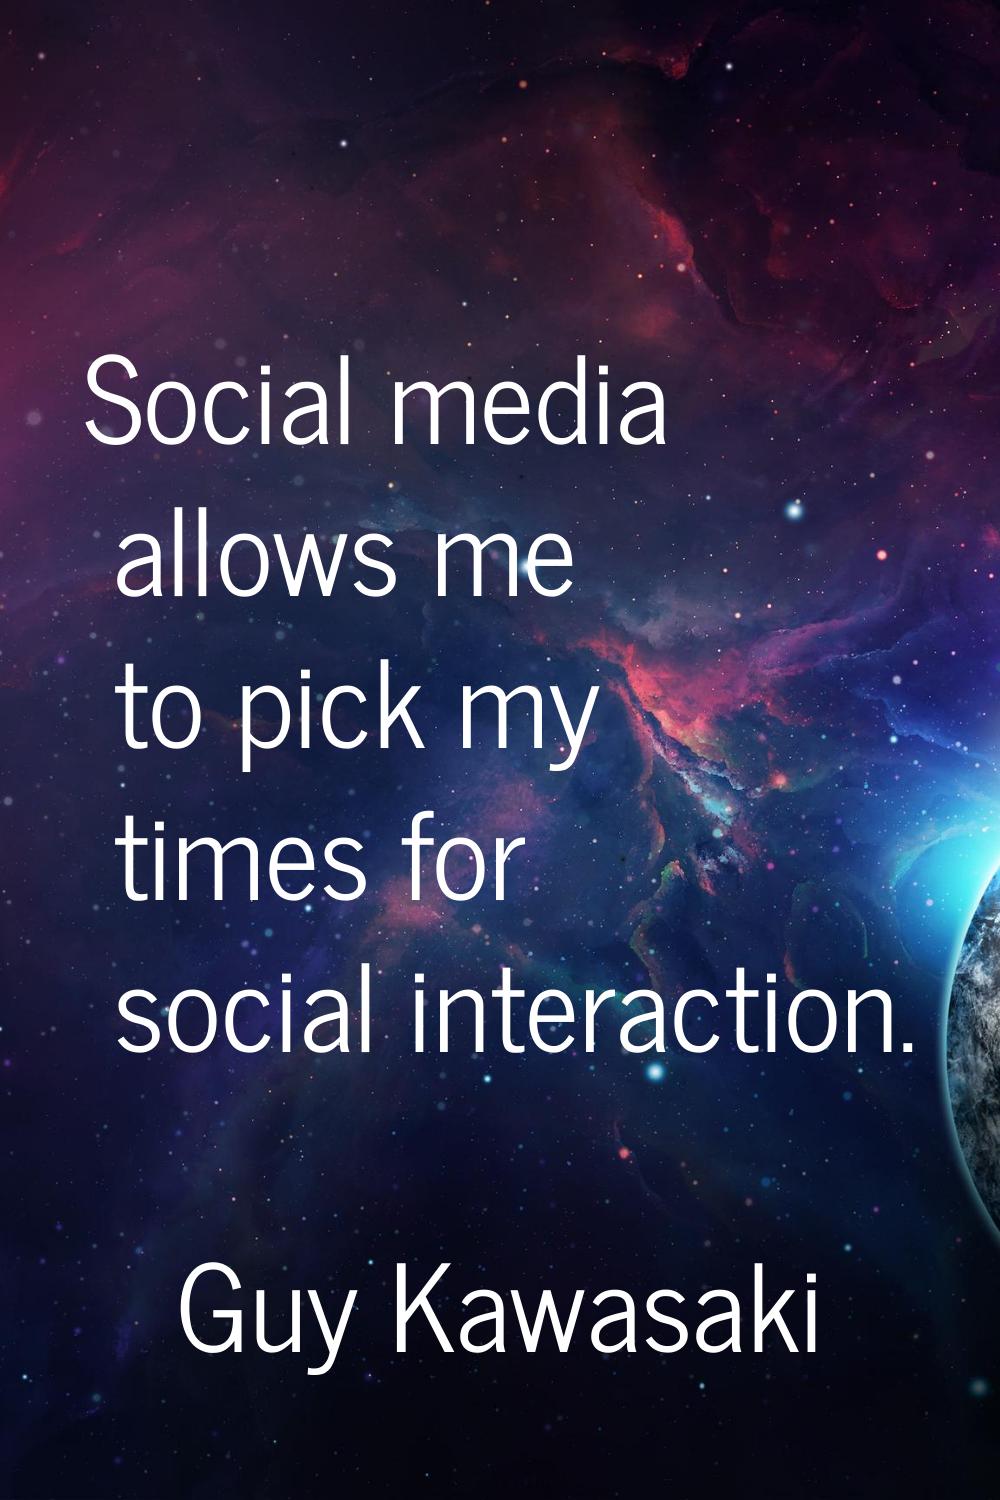 Social media allows me to pick my times for social interaction.